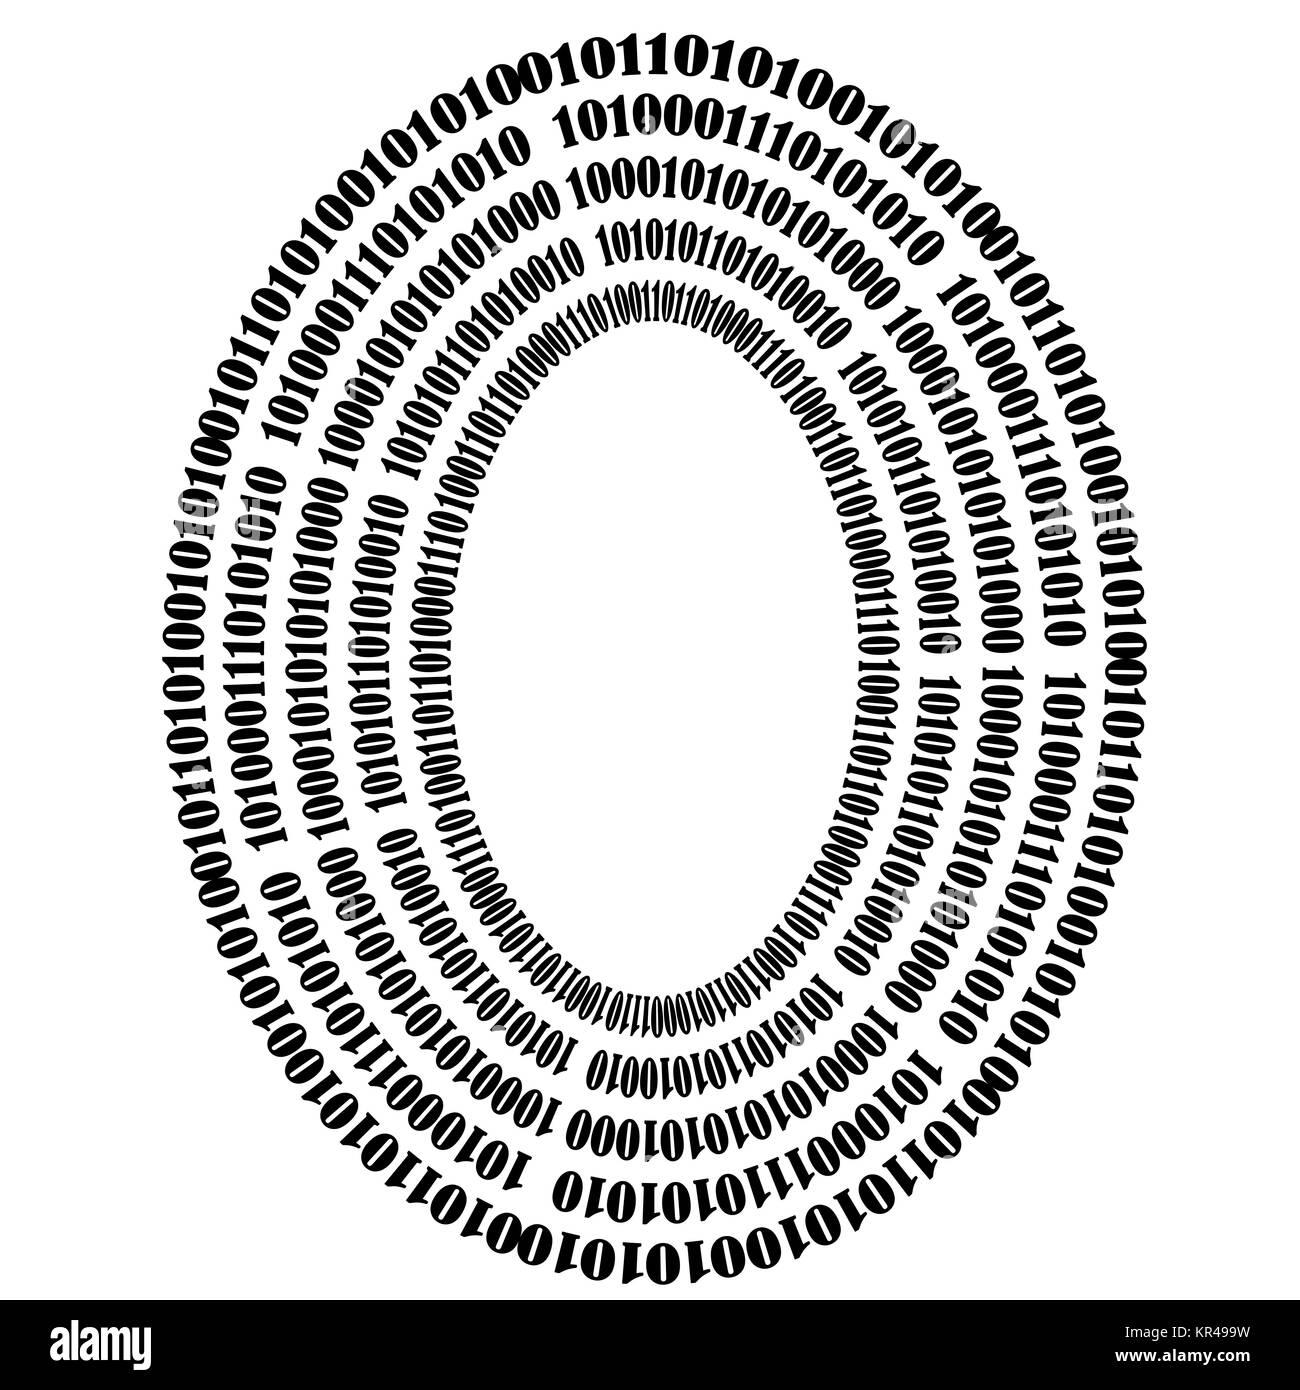 Binary numbers Black and White Stock Photos & Images - Alamy